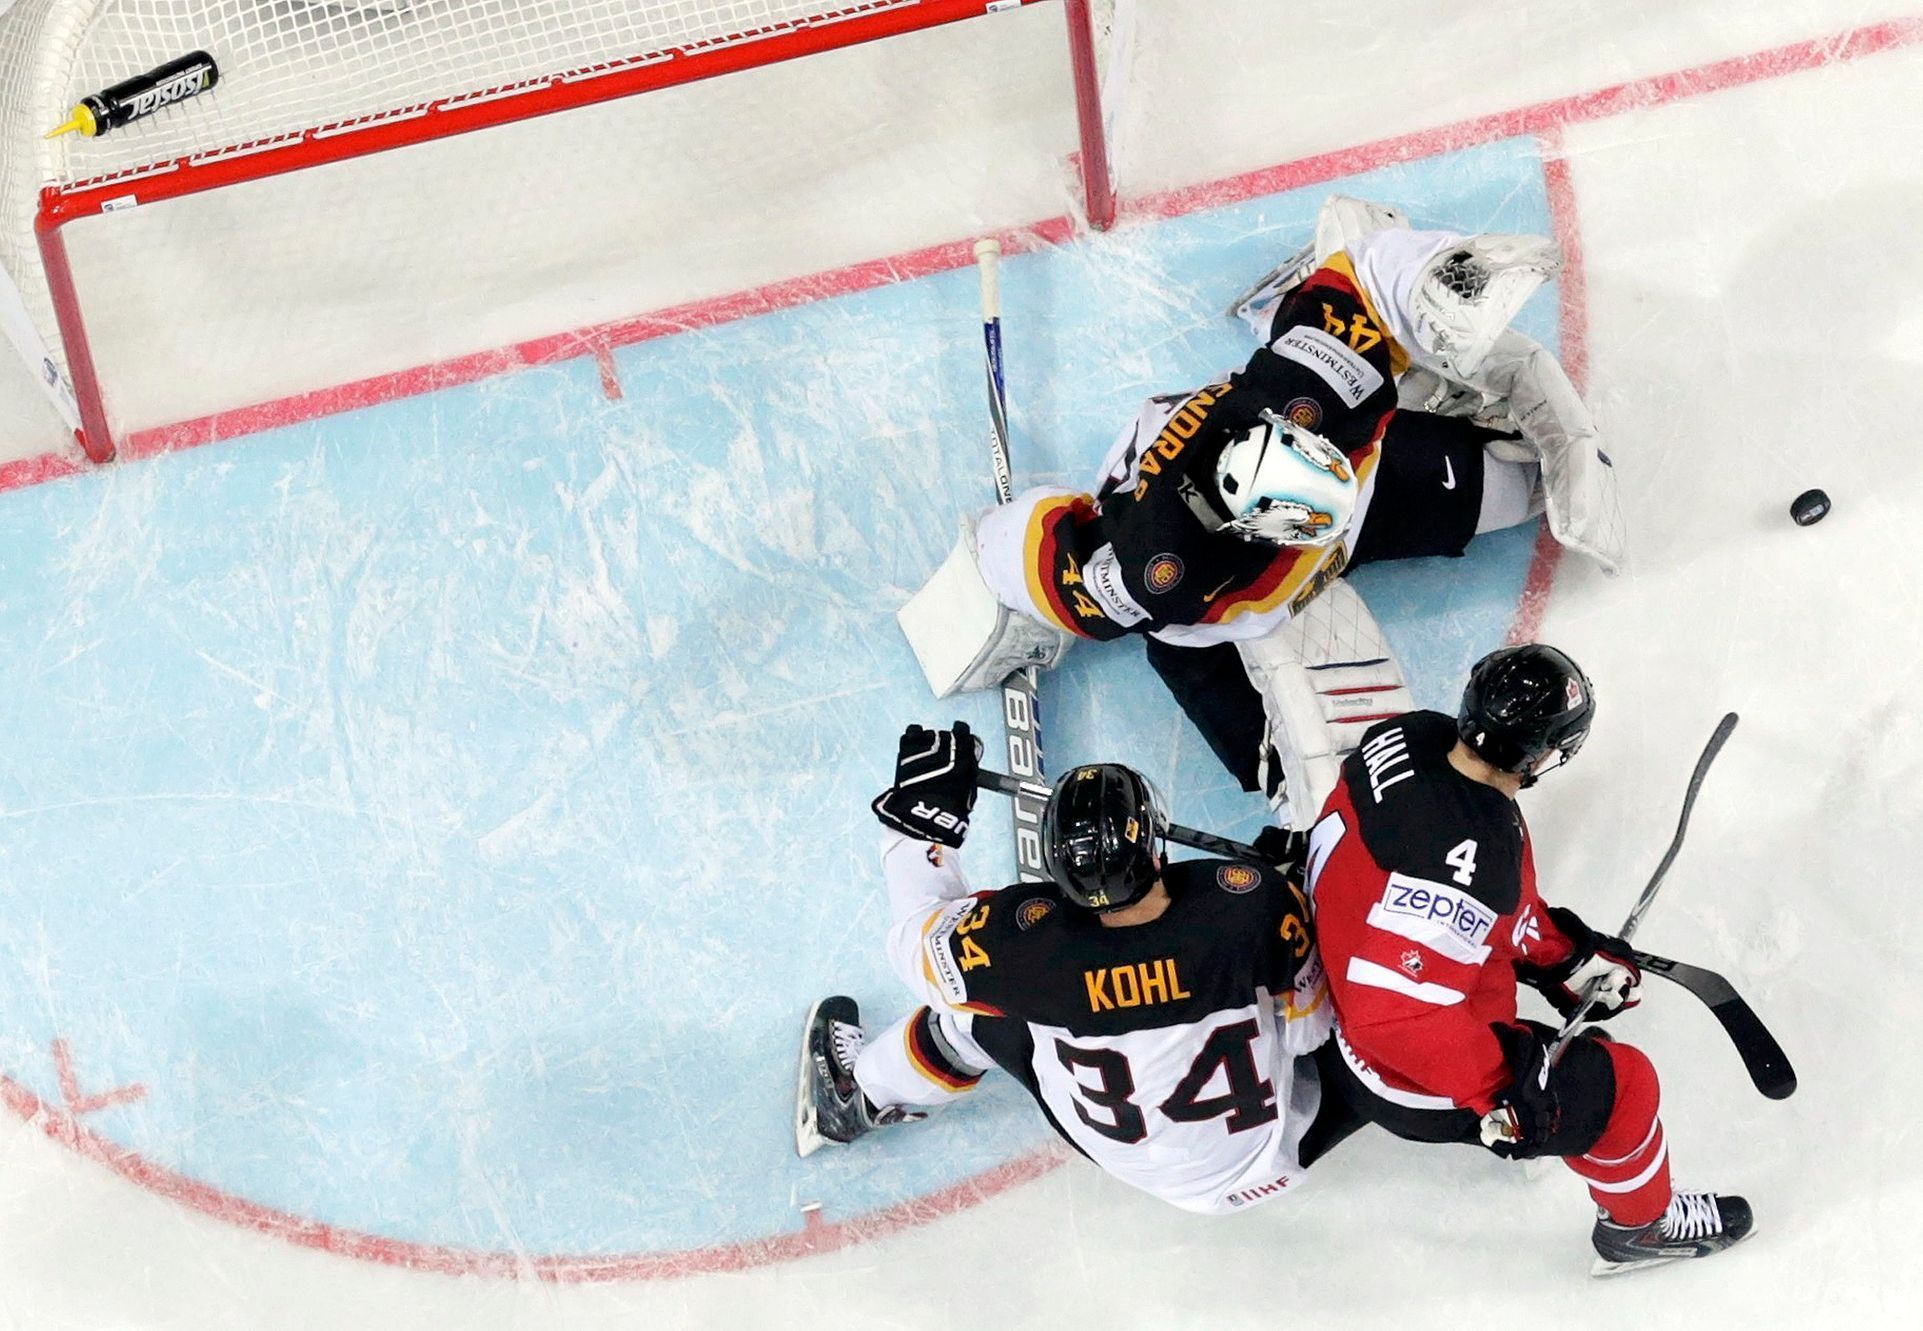 Germany's goaltender Endras and Kohl are challenged by Canada's Hall during their Ice Hockey World Championship game at the O2 arena in Prague